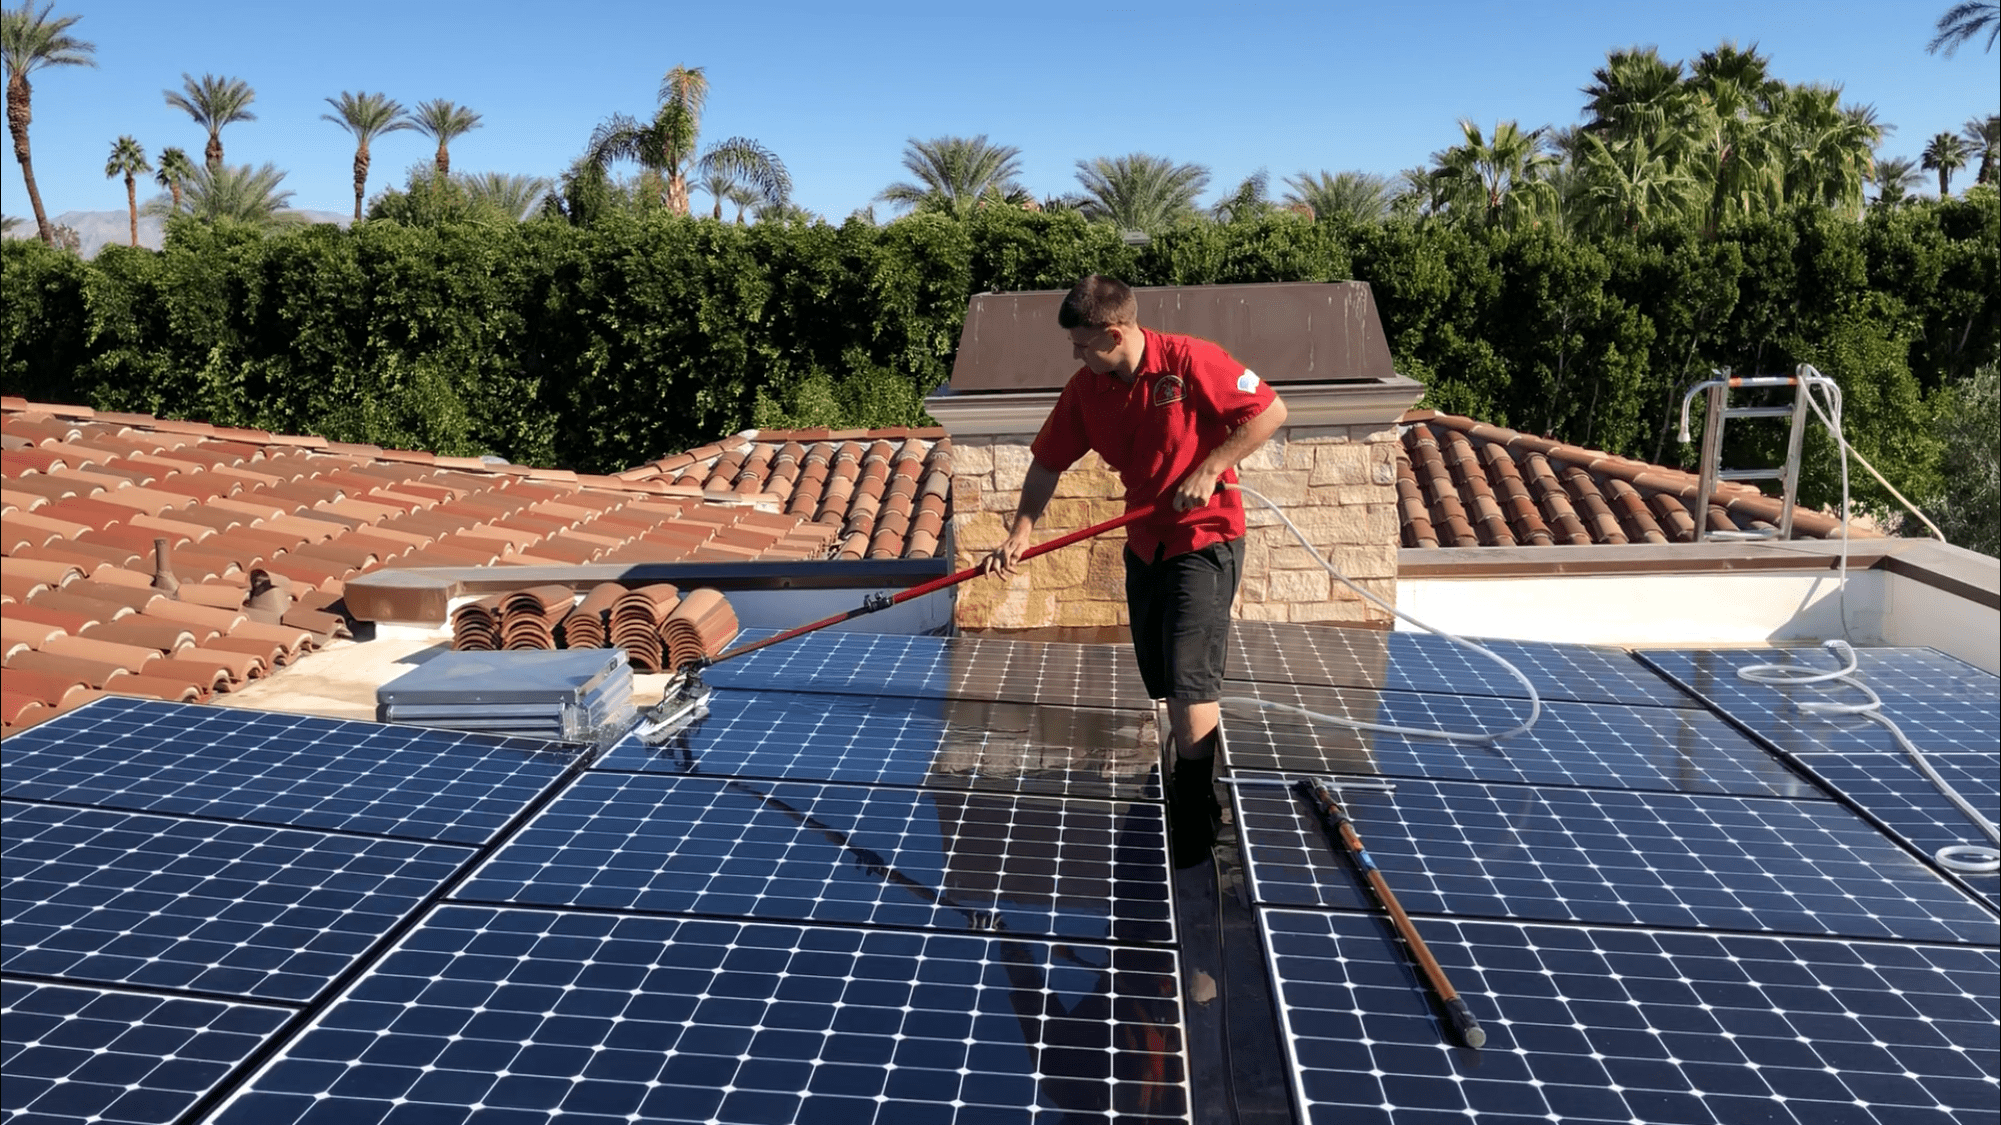 Cleaning solar panels to increase their efficiency